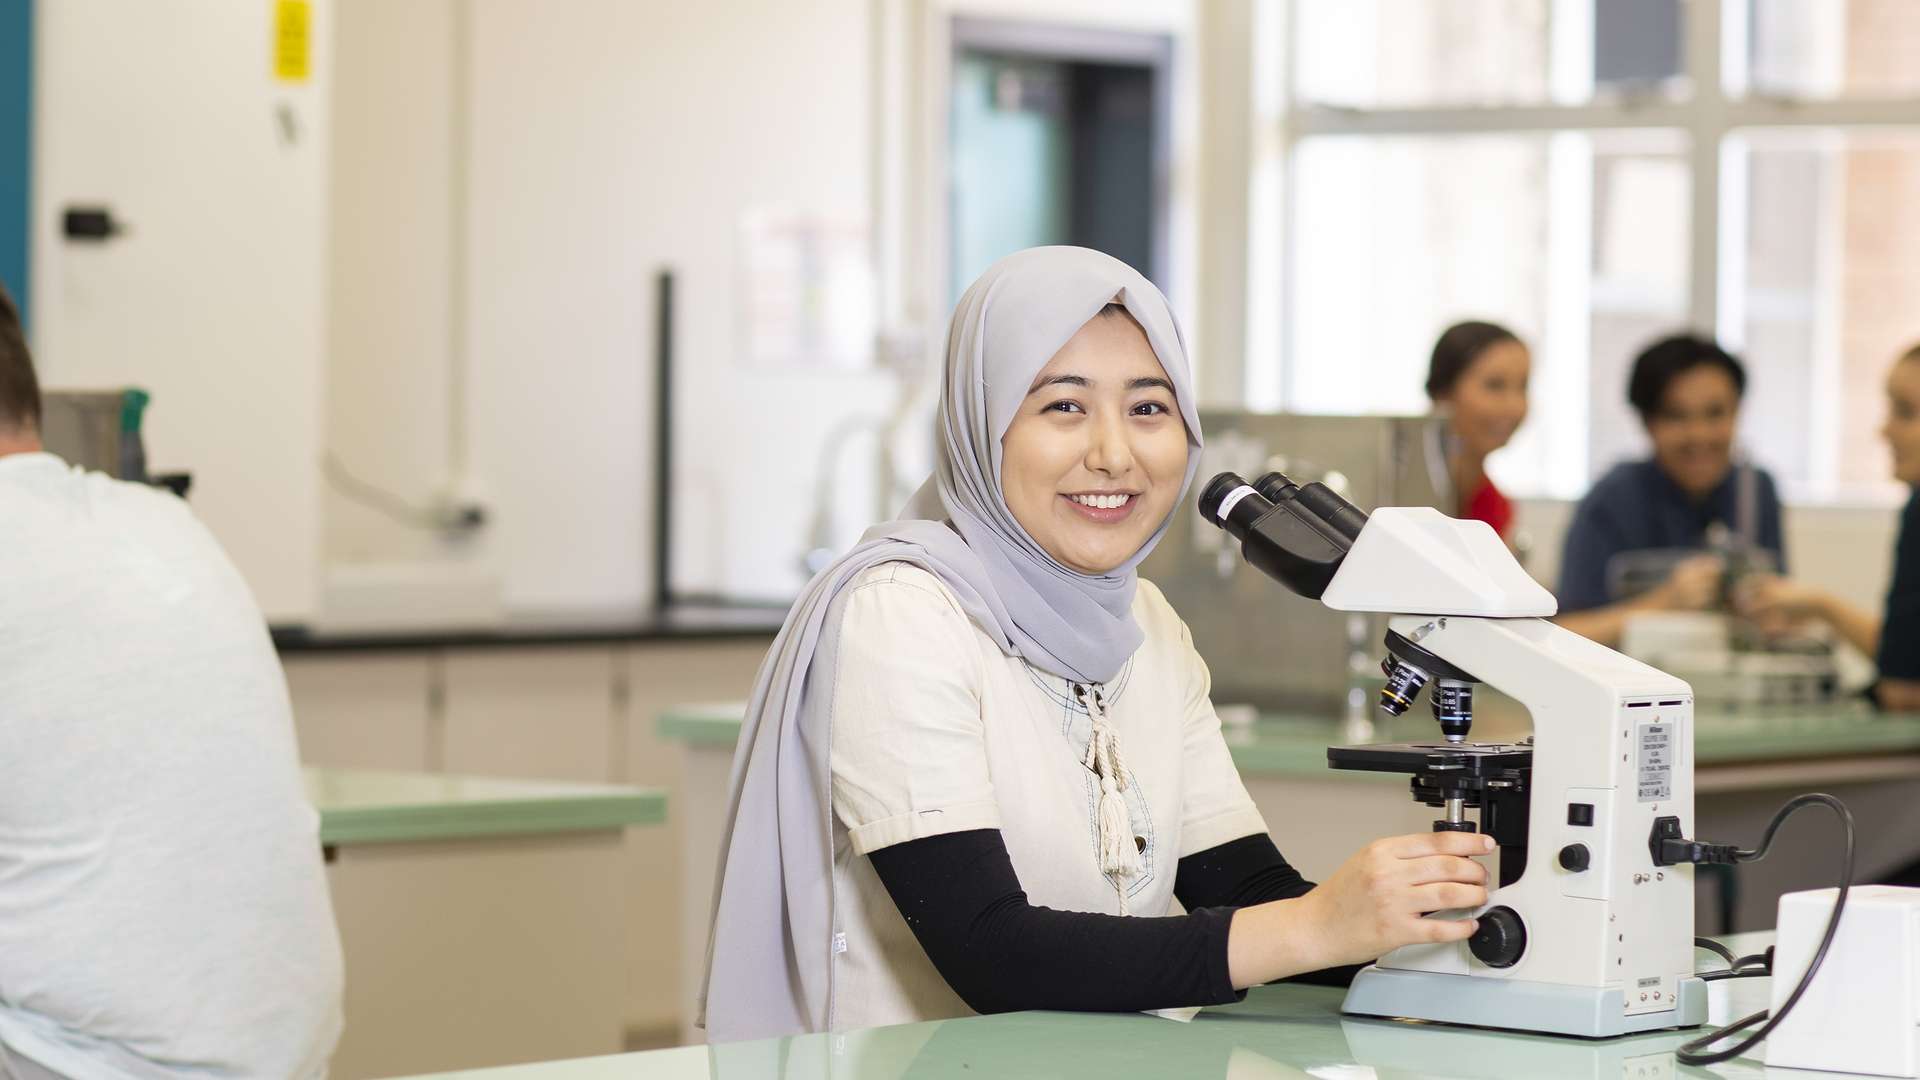 Medical students working in a laboratory, with a student using a microscope in focus.